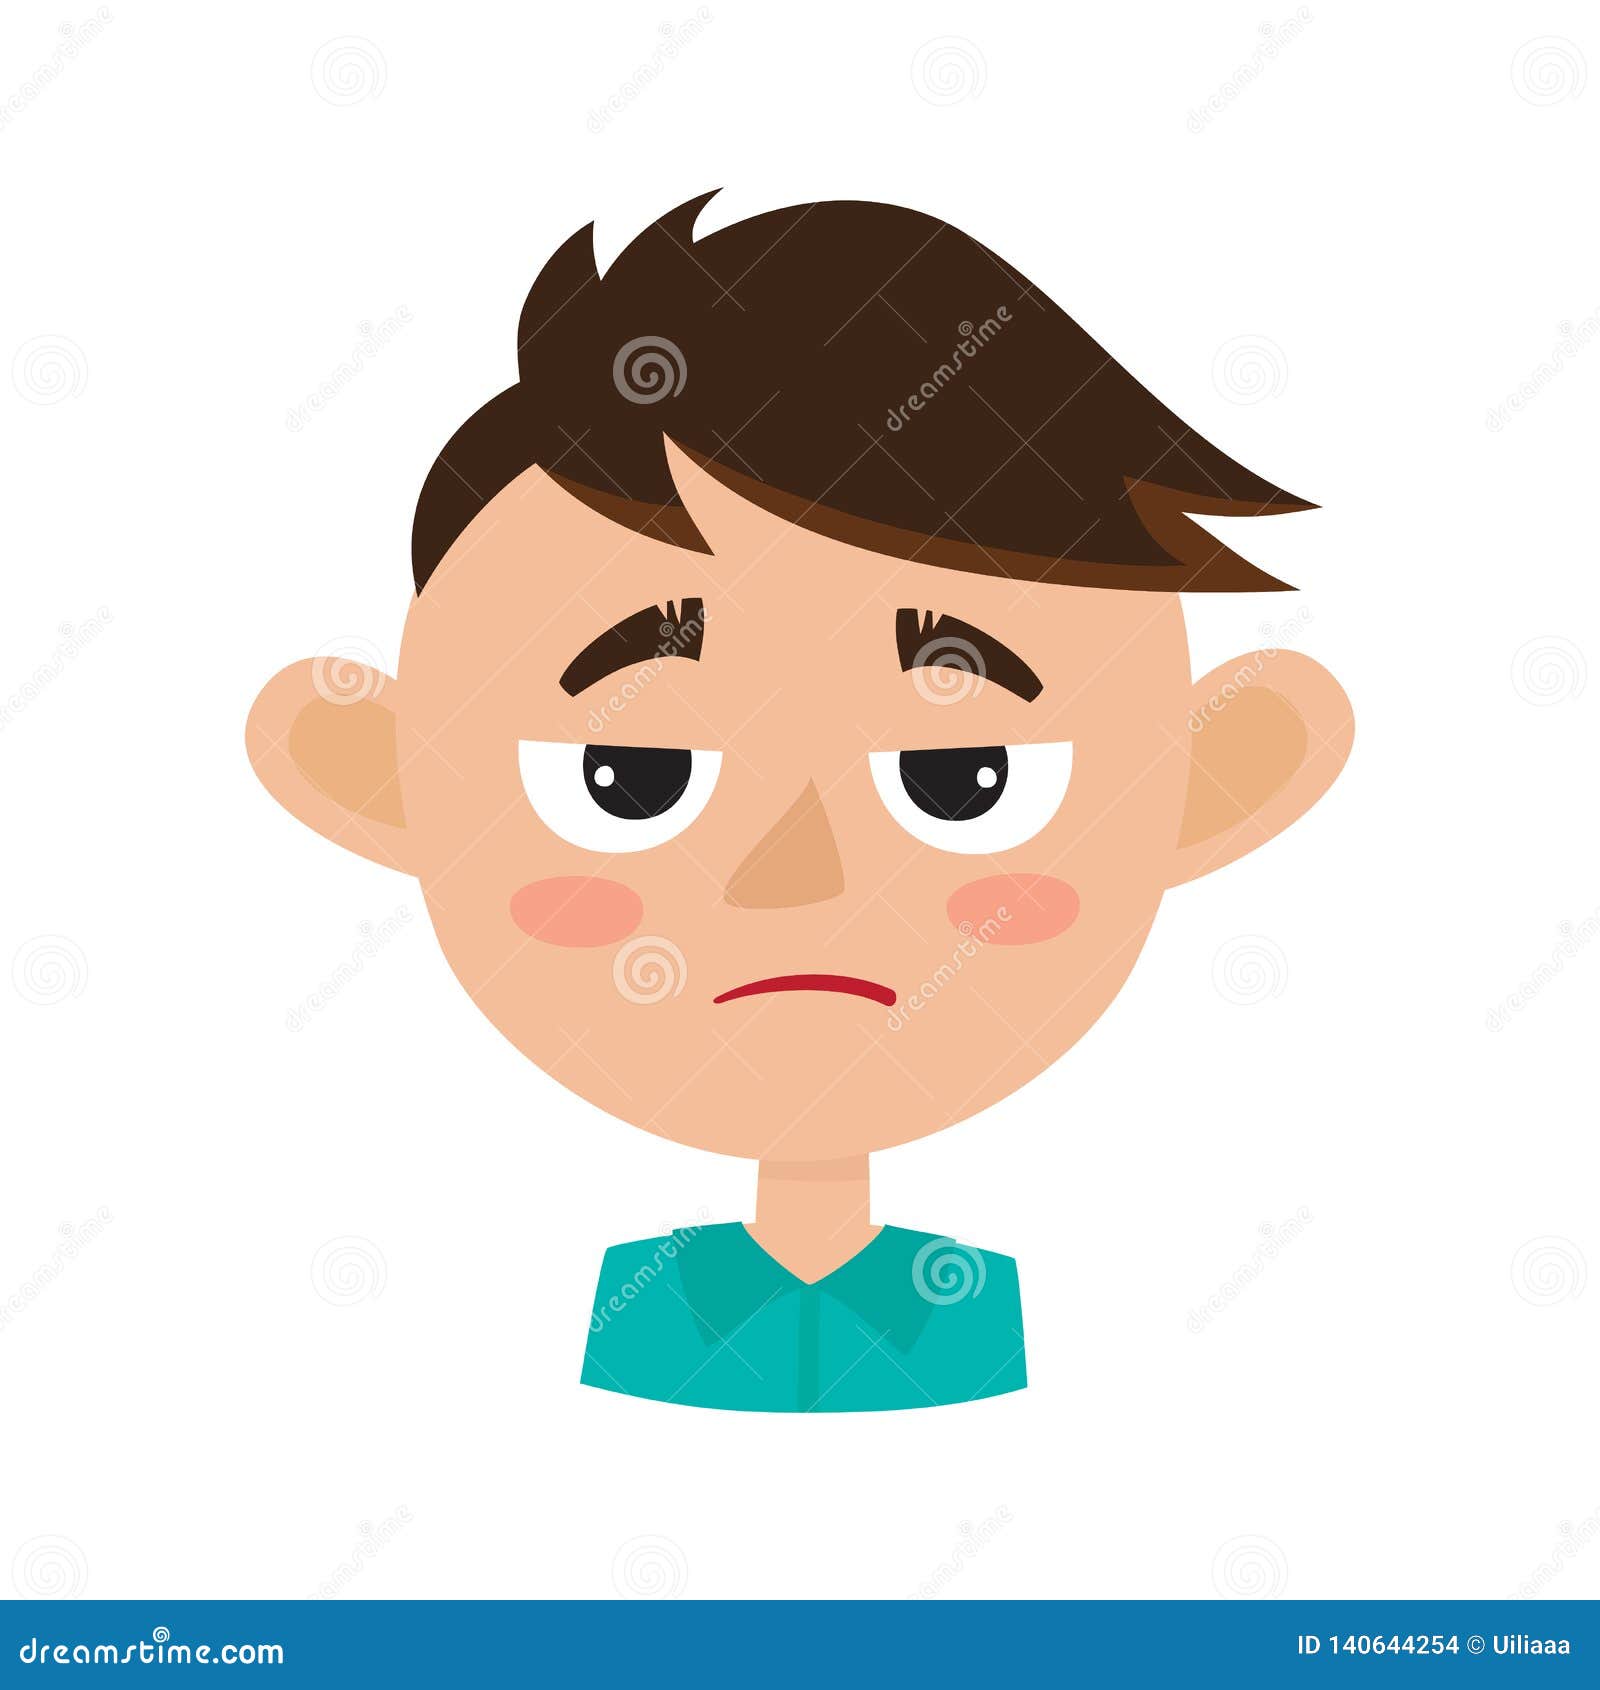 Boy Angry Face Expression, Cartoon Vector Illustrations Isolated on